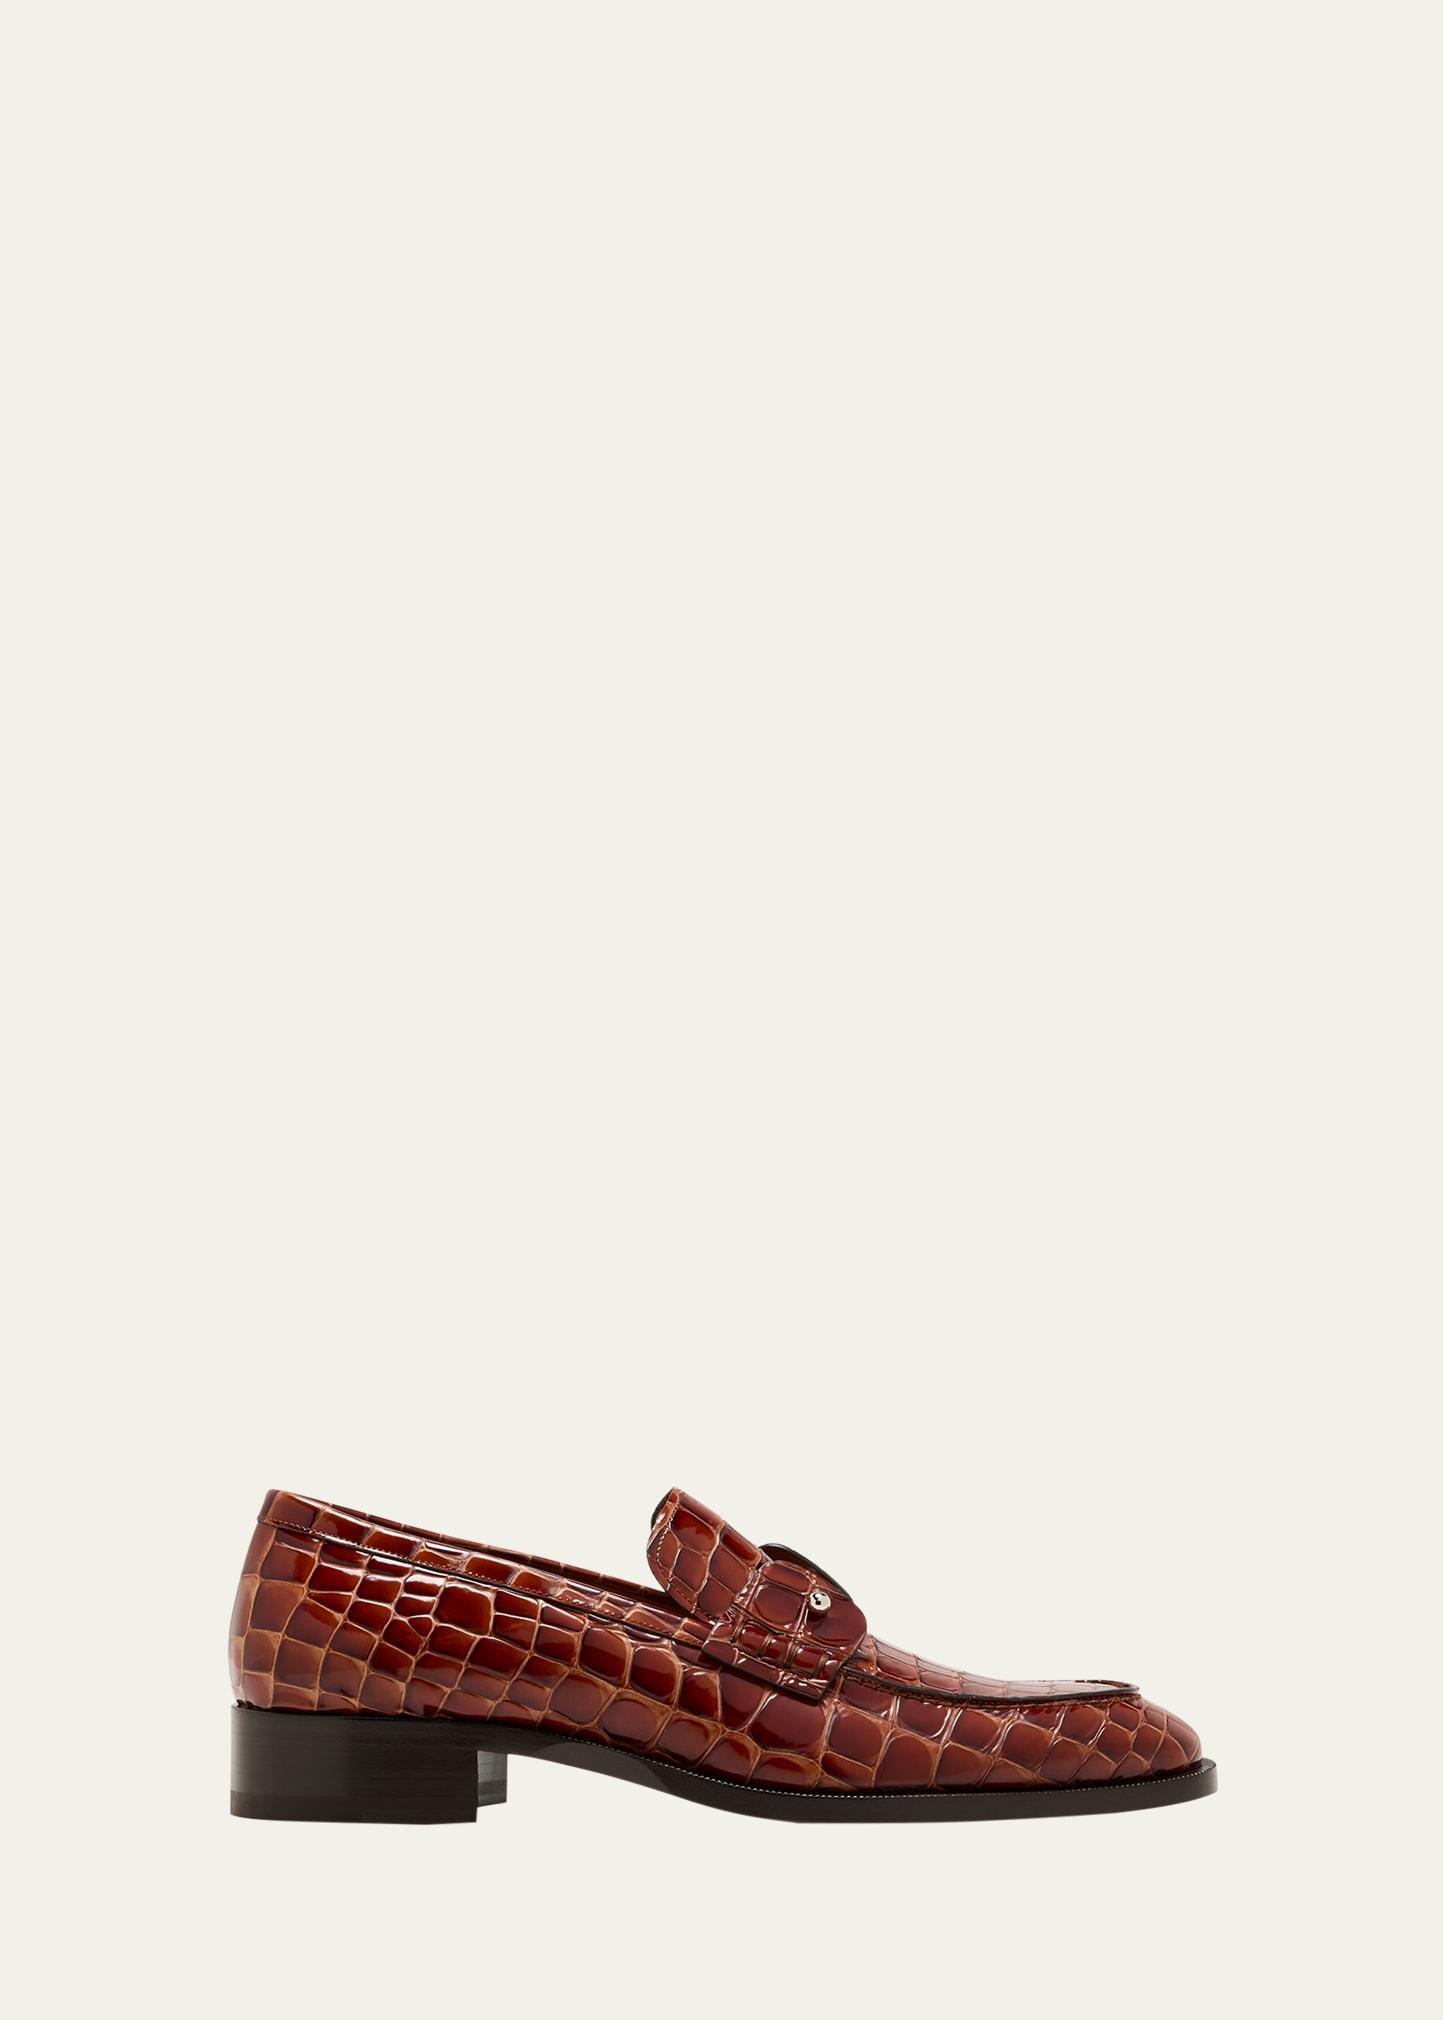 Tweed Heeled Penny Loafers Product Image